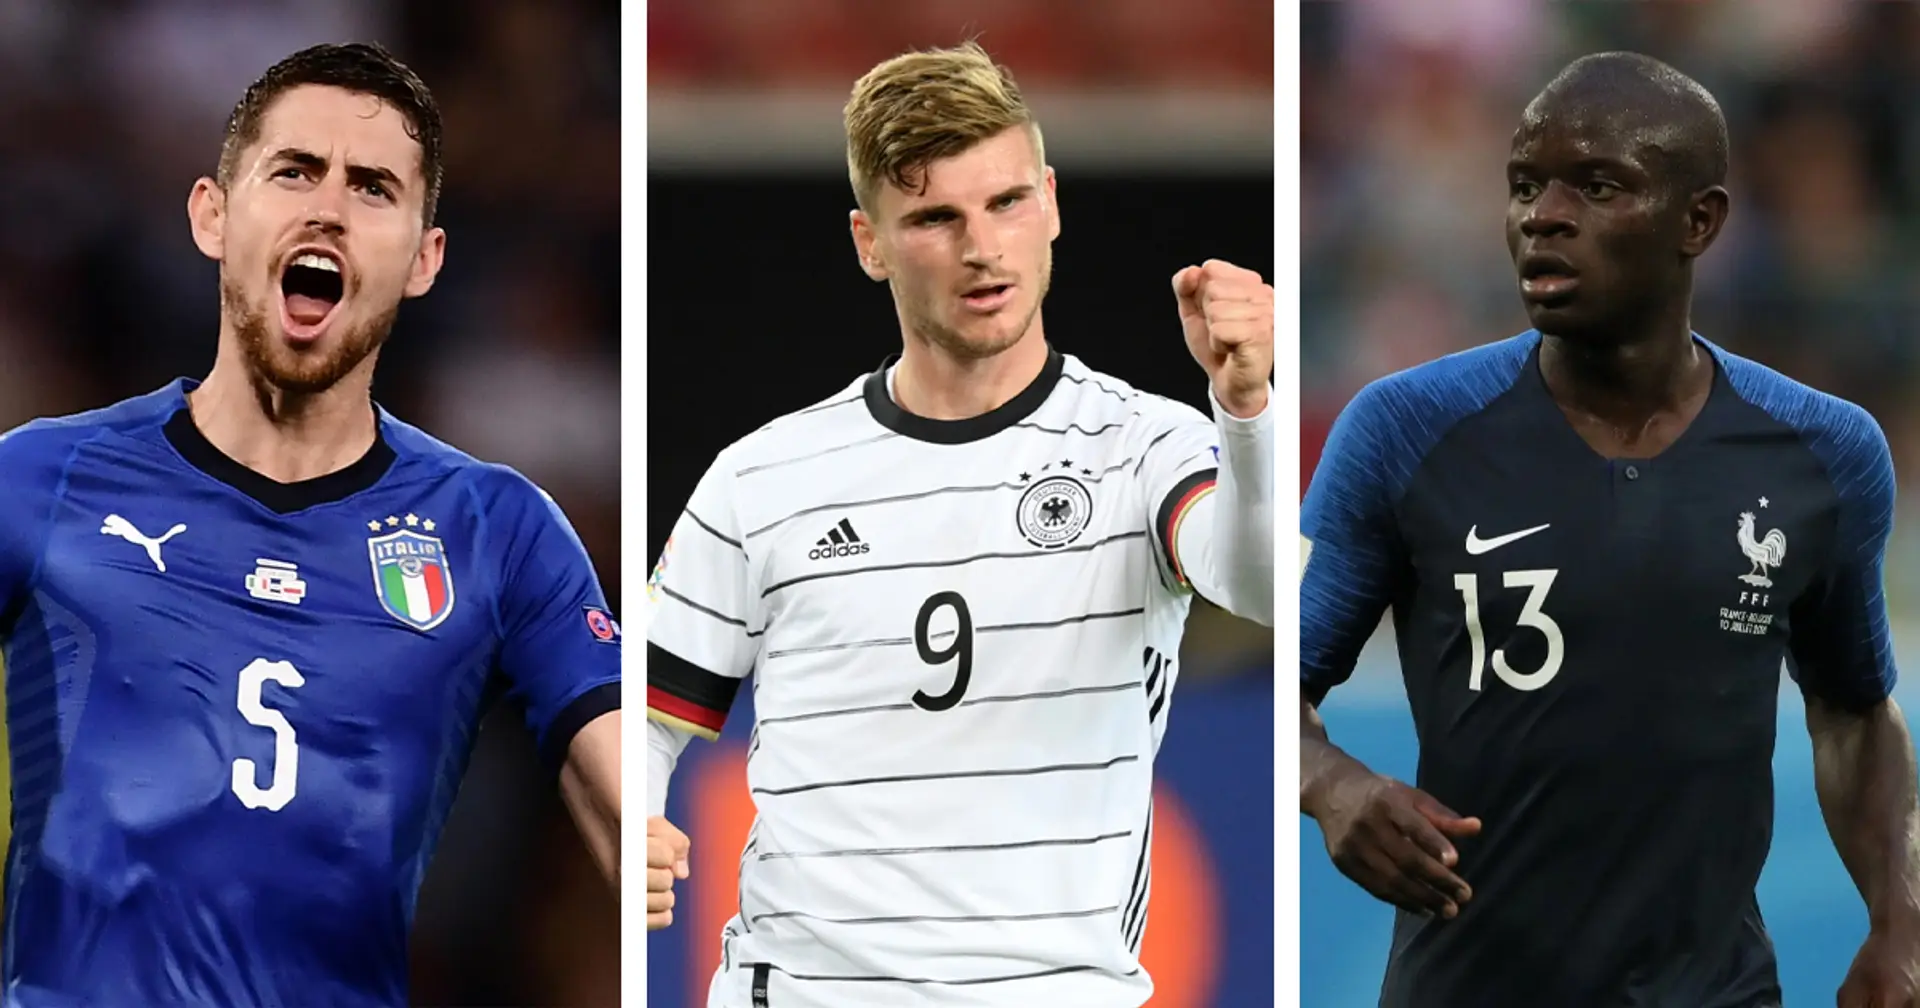 17 Chelsea players can play at Euro 2020: full list and when they can face each other